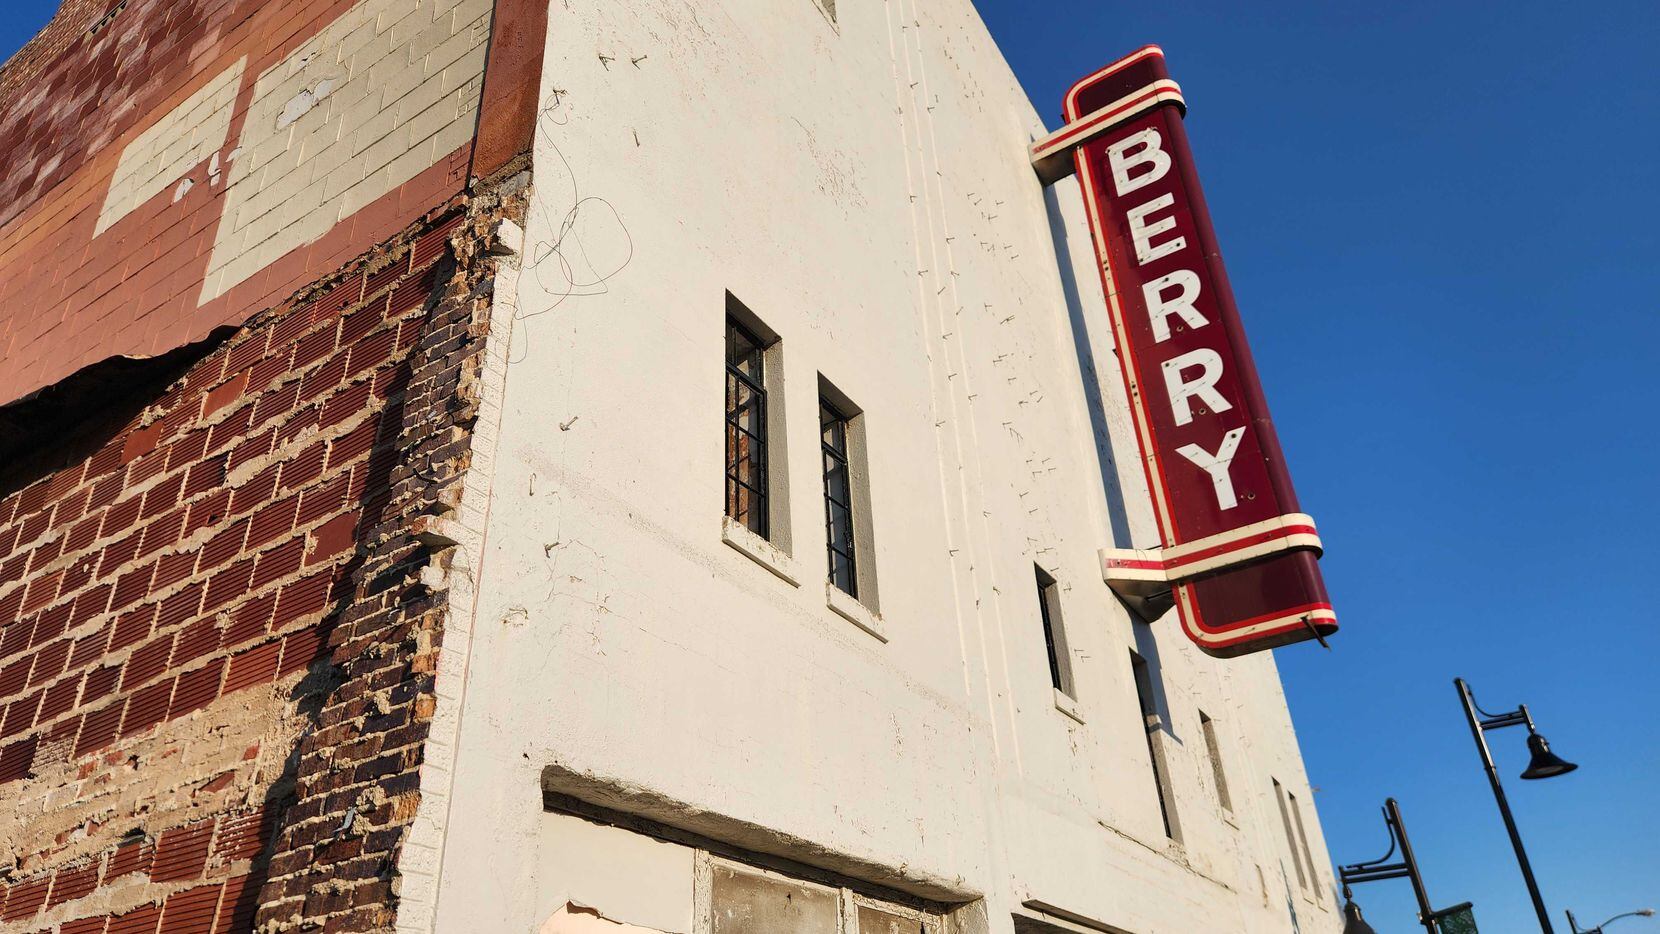 The Berry Theatre, located in the Hemphill neighborhood of Fort Worth, was opened in April...